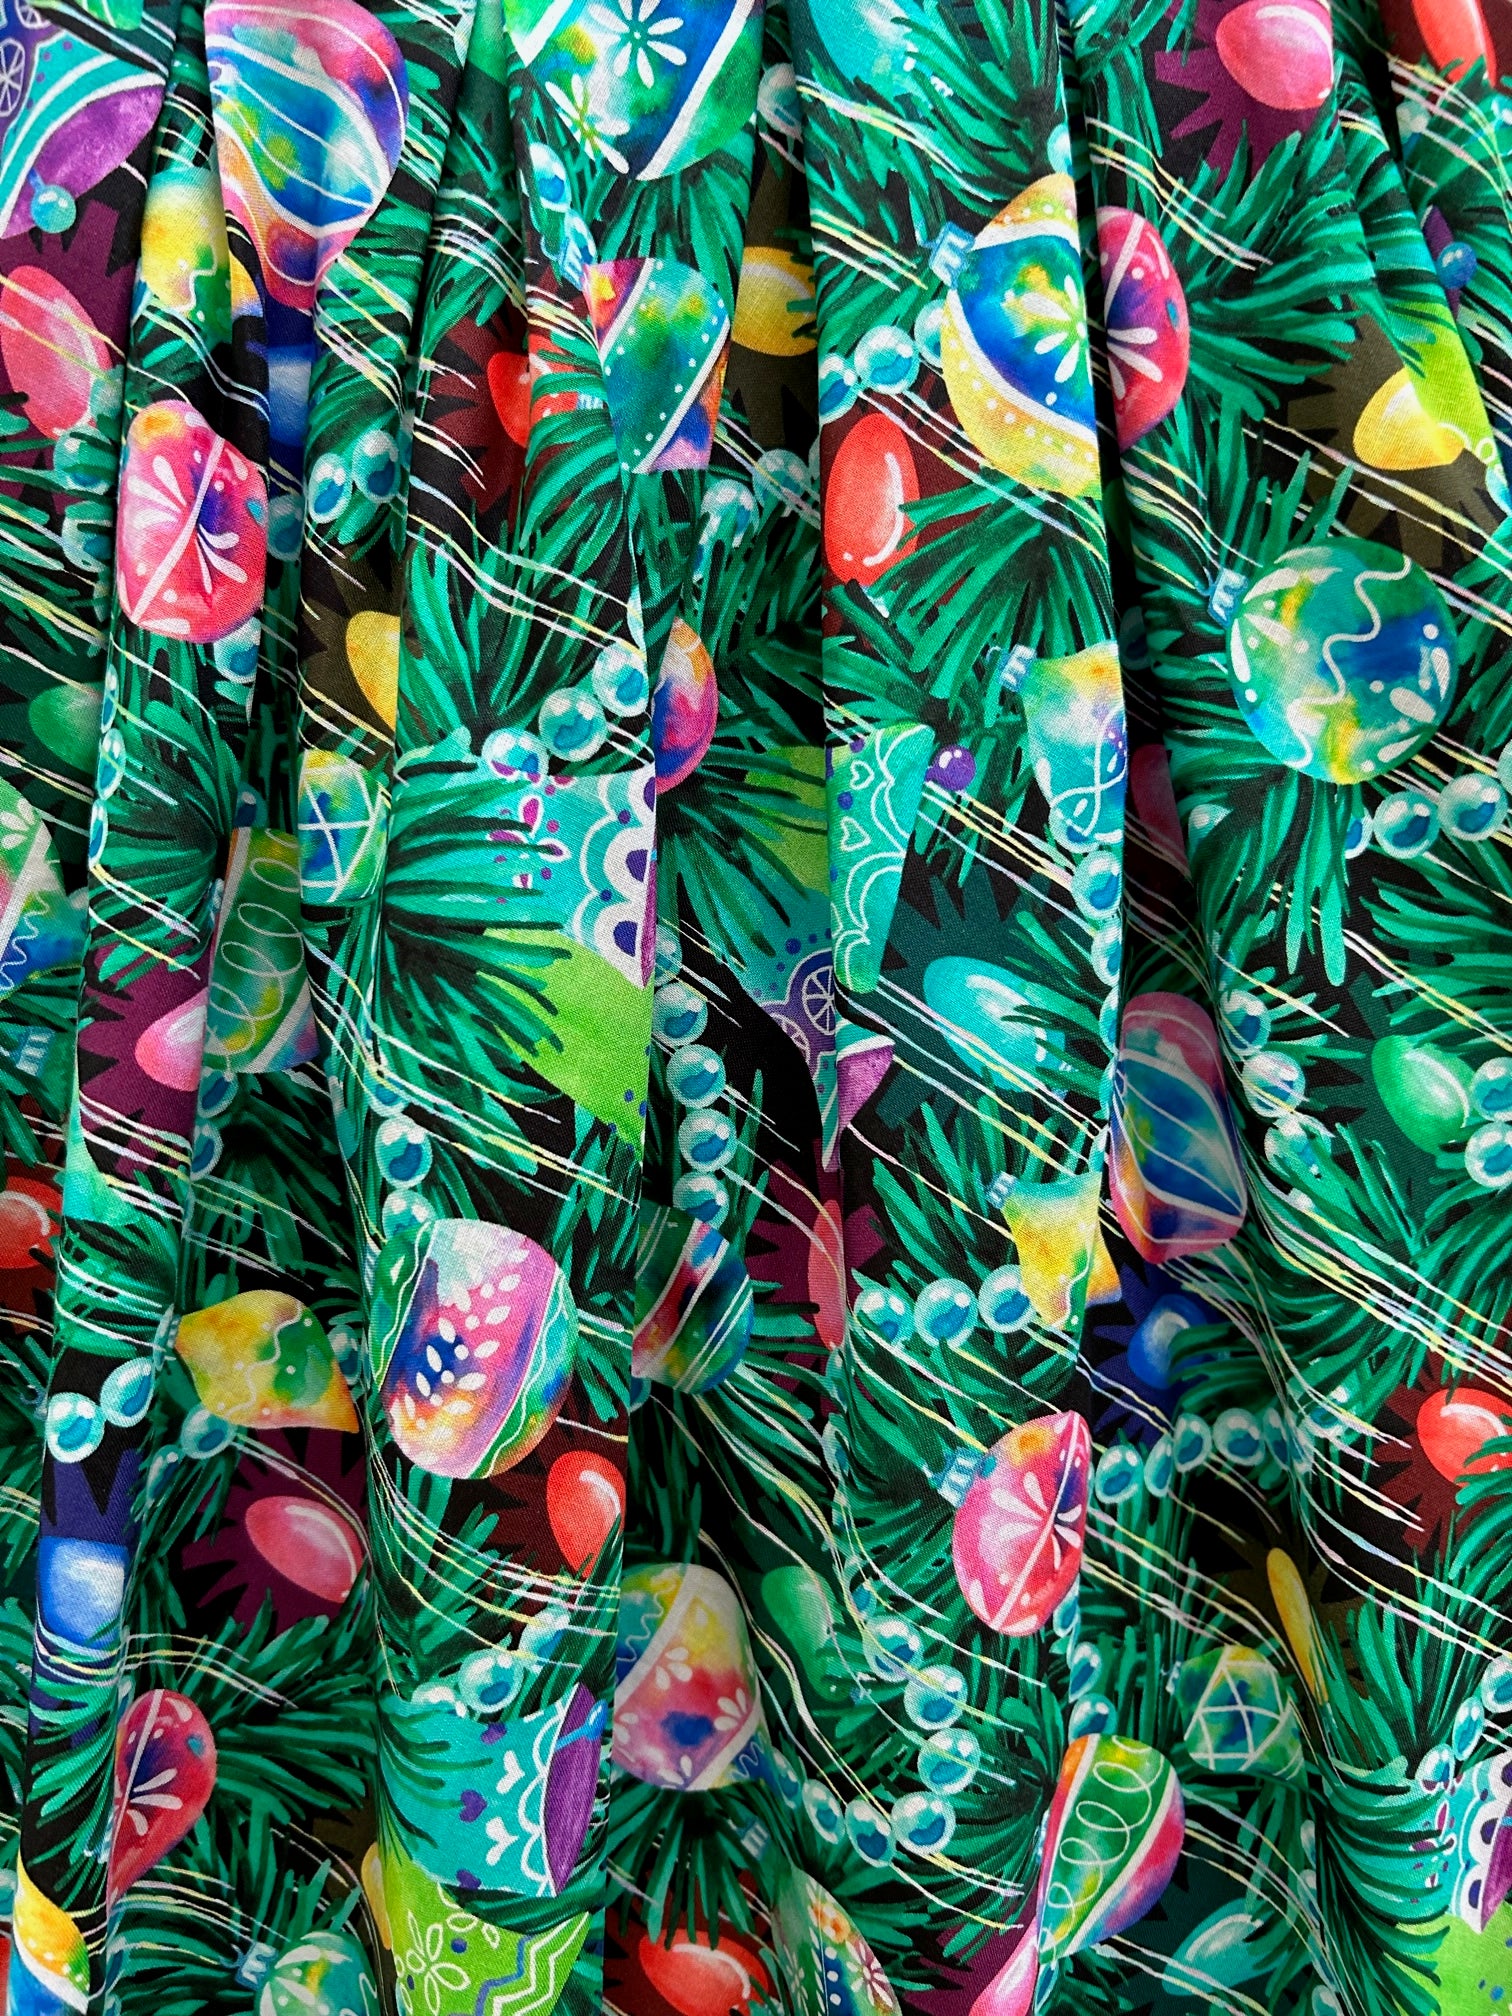 close up showing the colorful ornaments on a geen background